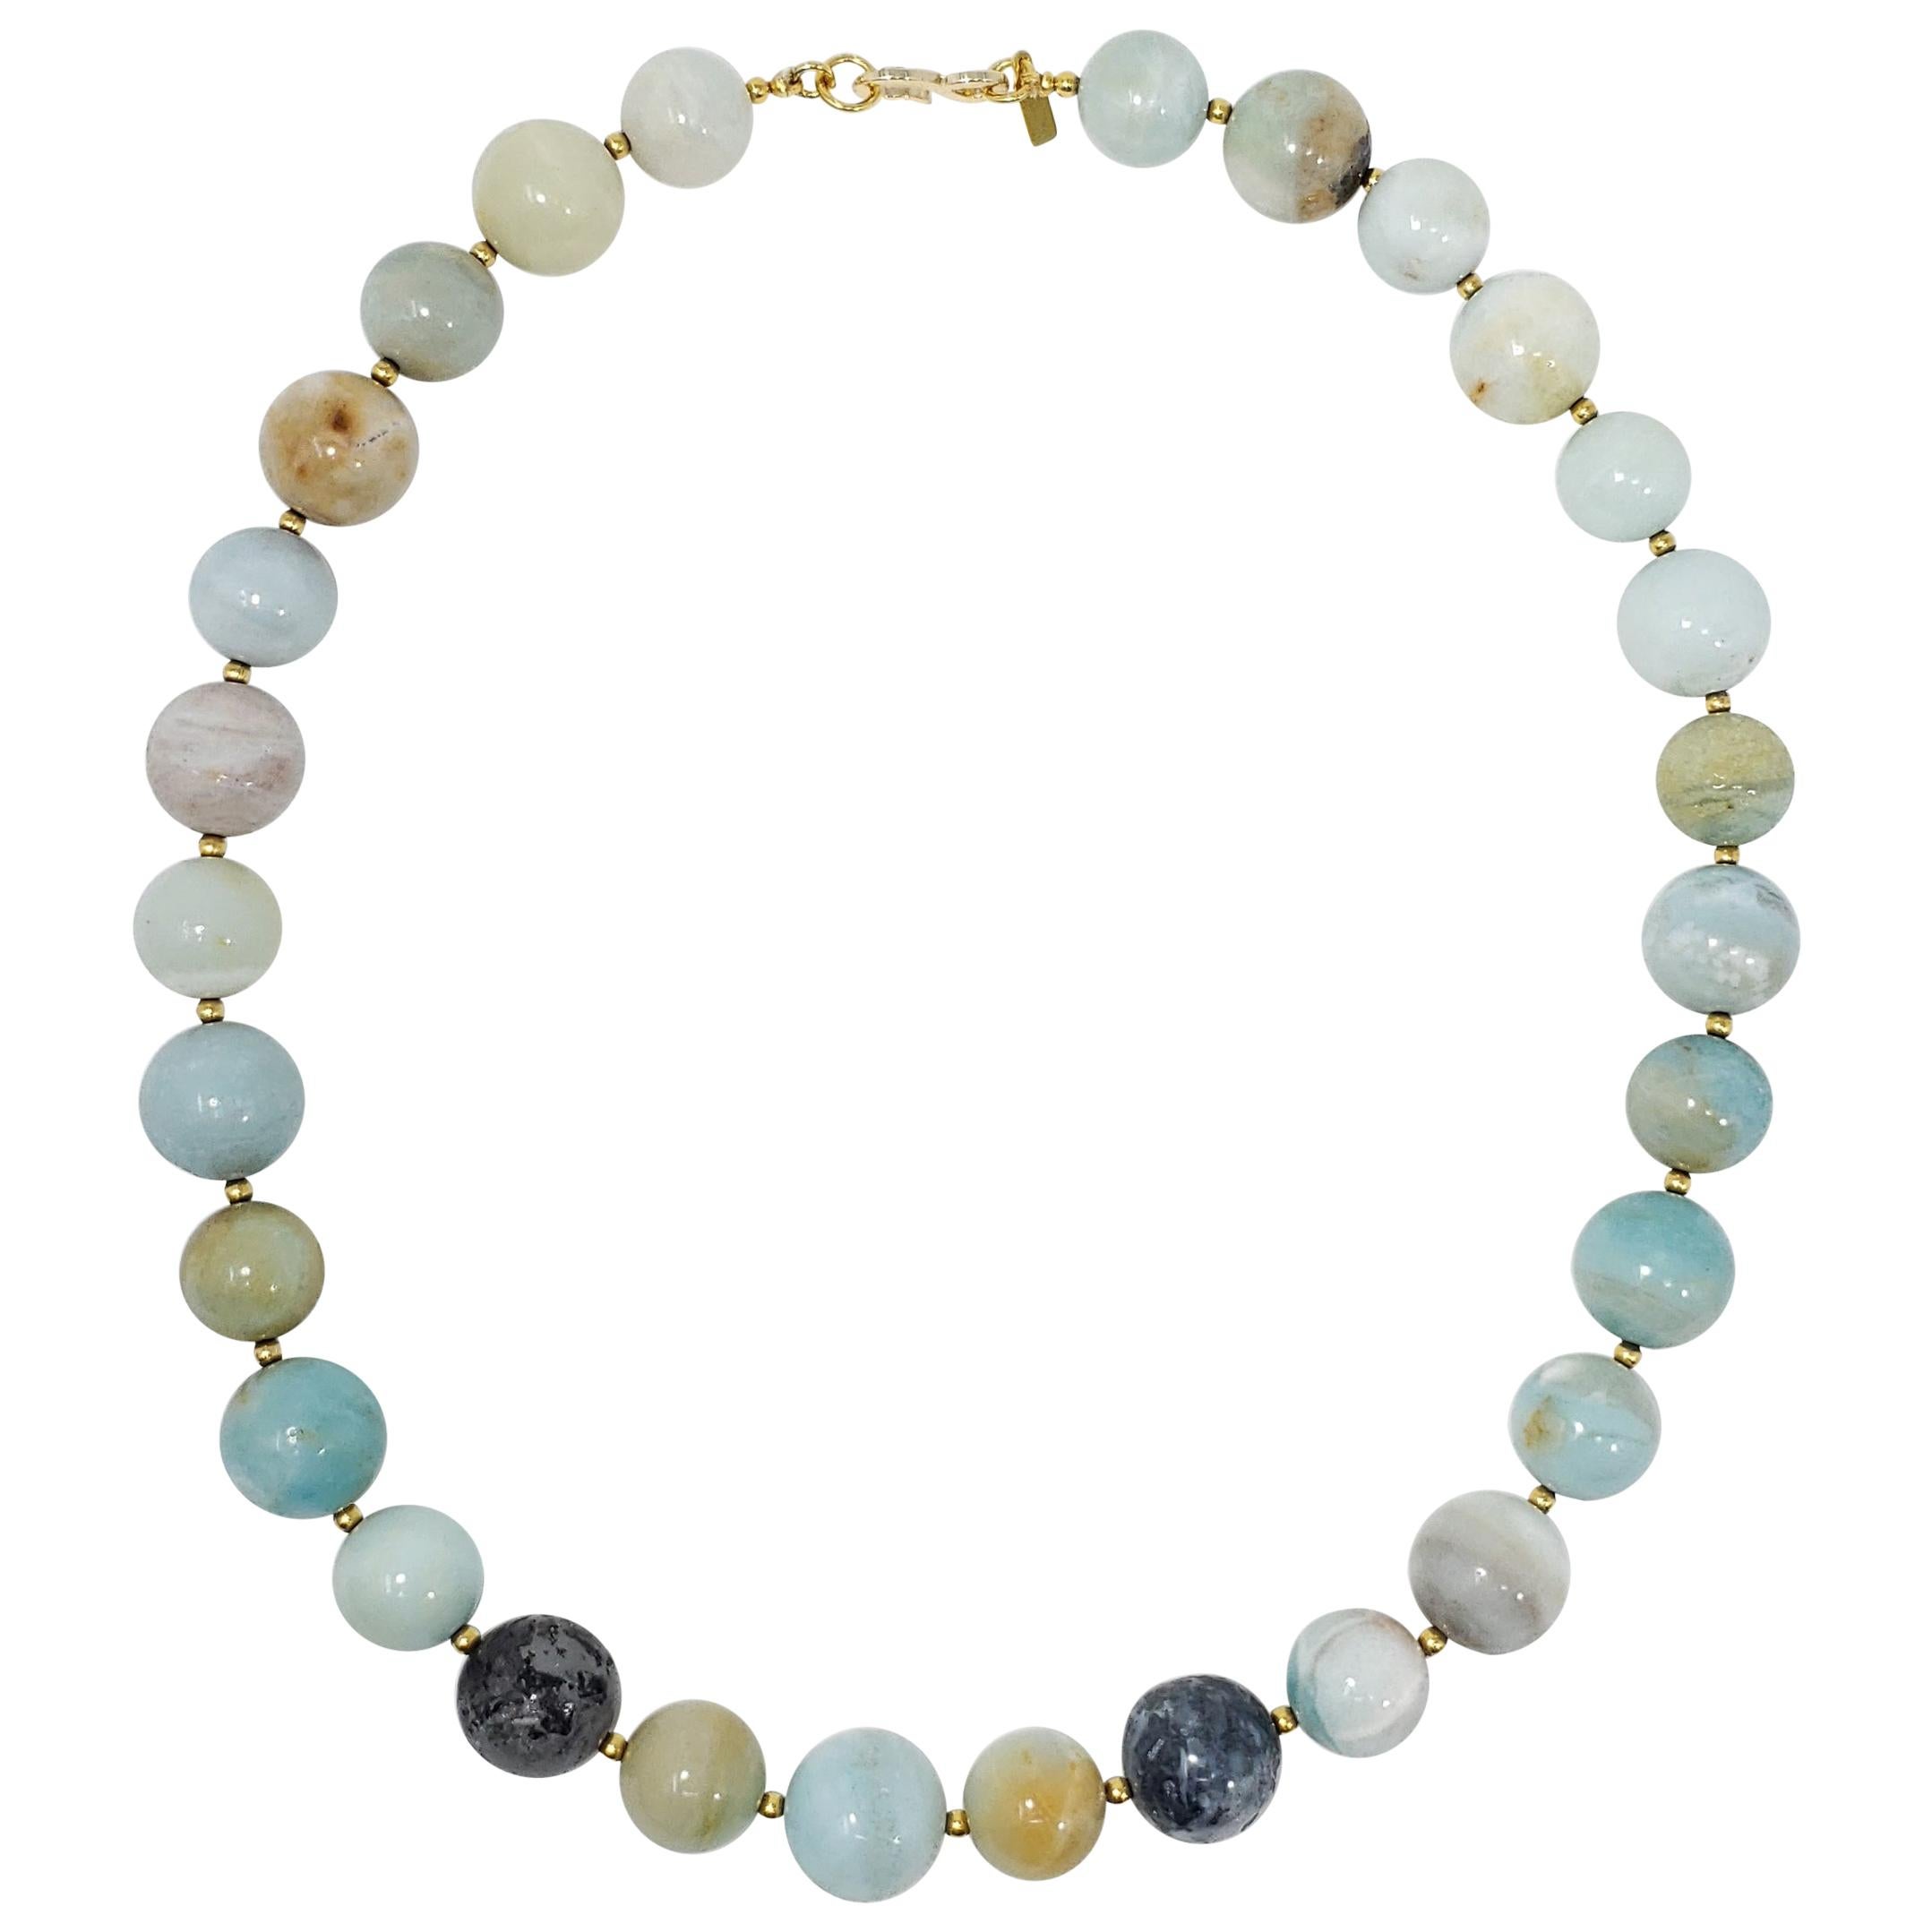 Kenneth Jay Lane Amazonite Bead Necklace with Golden Accents